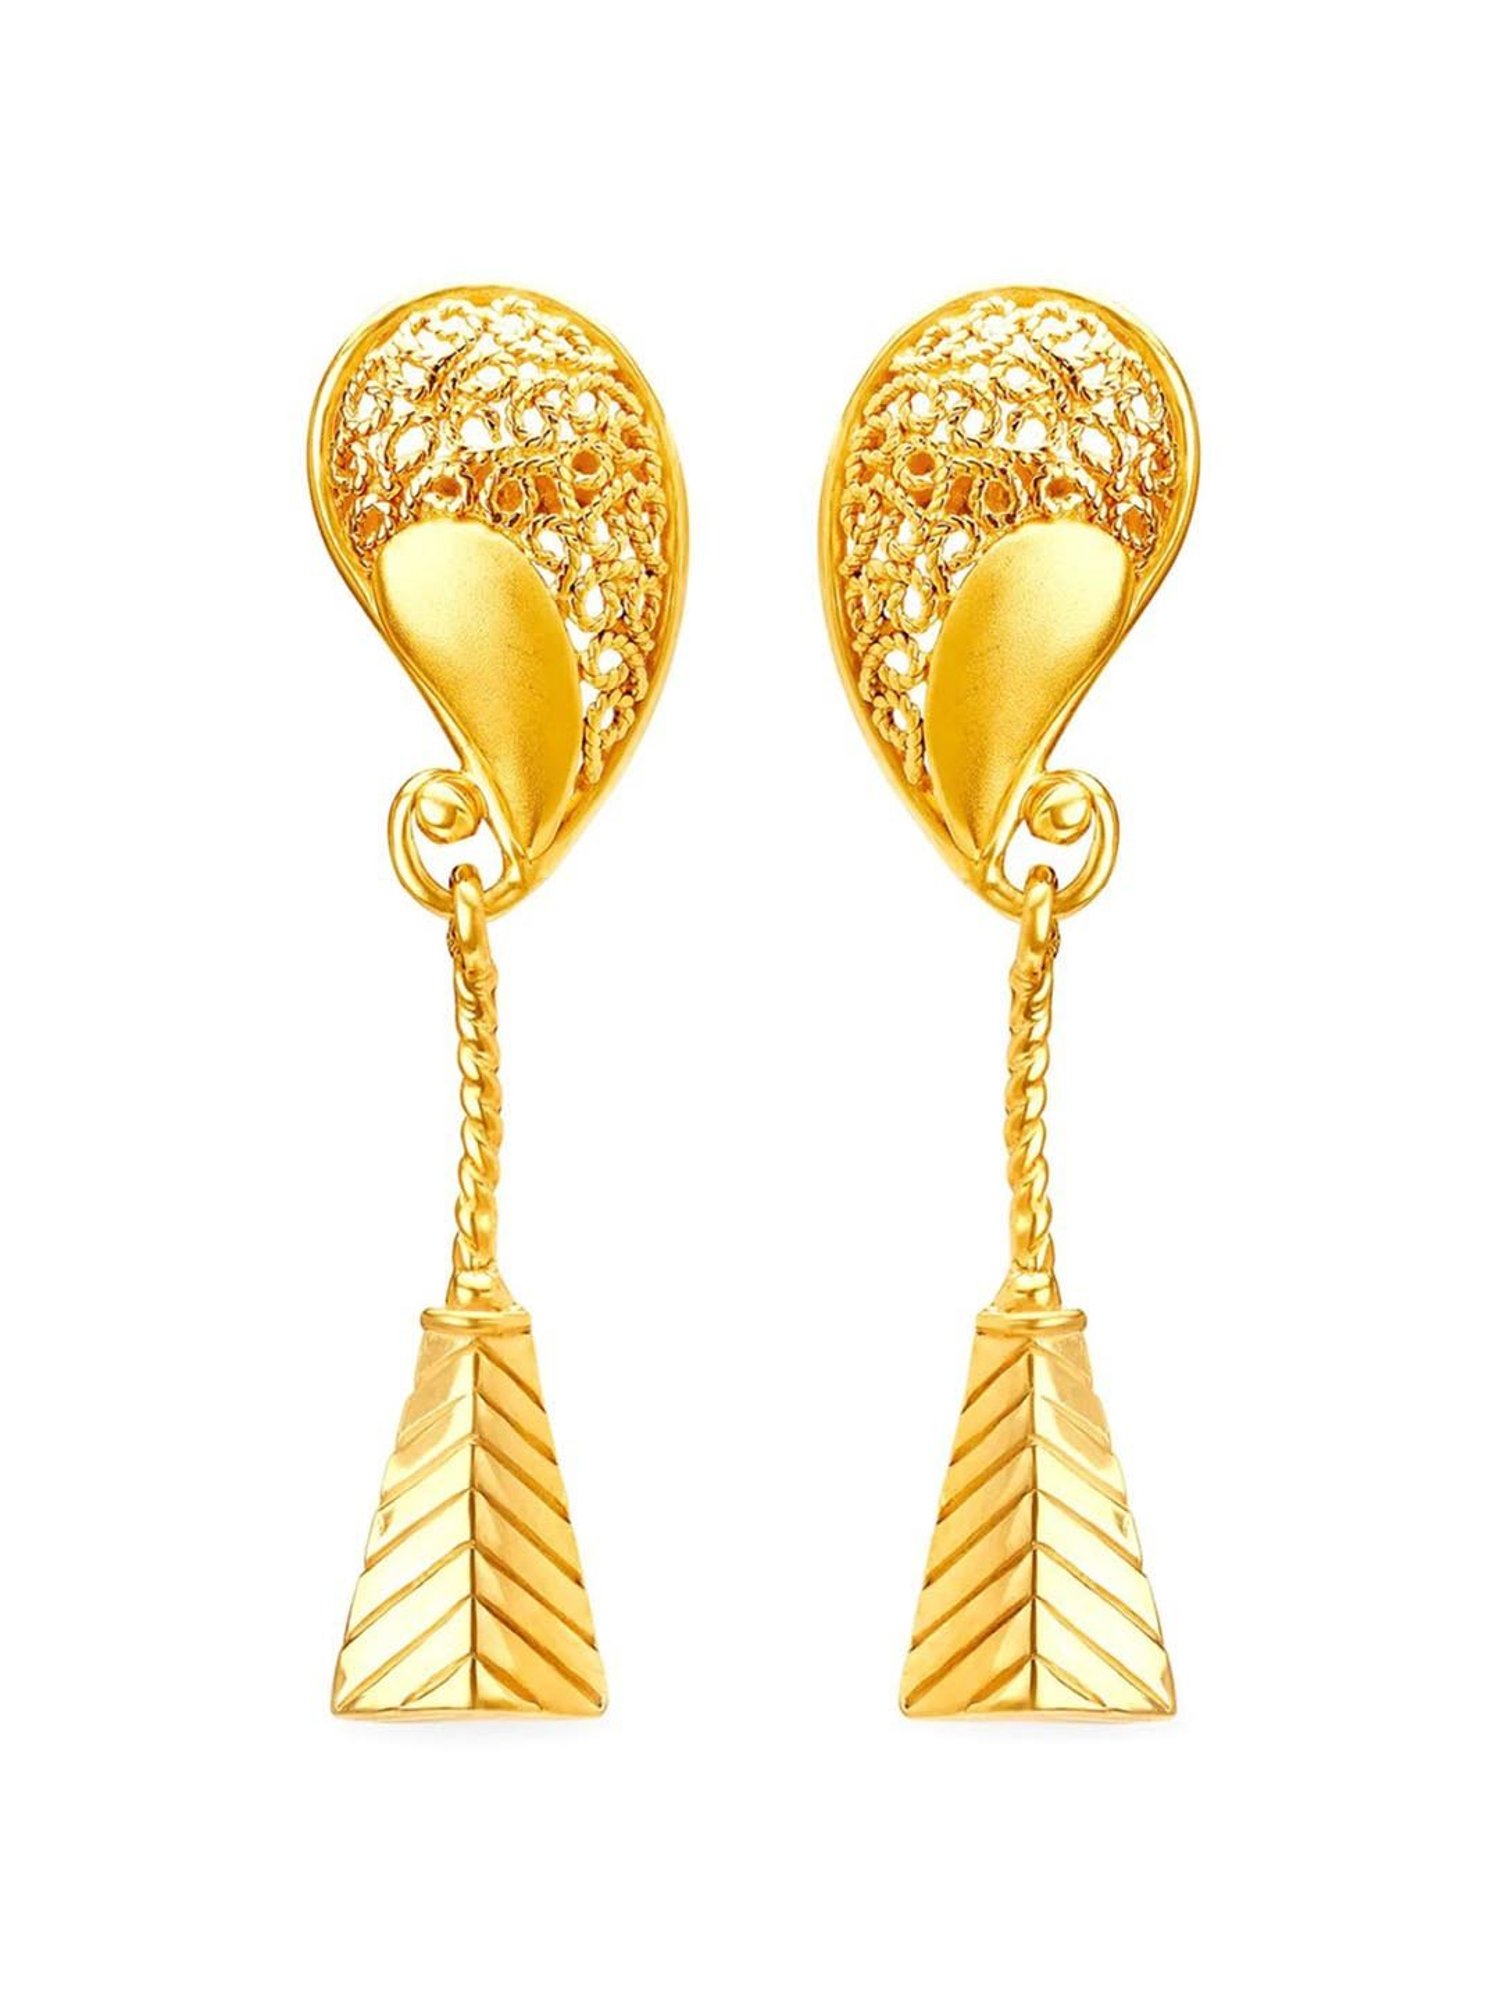 Tanishq Butterfly Shaped Gold Stud Earrings in Civil Lines  magicpin   September 2023